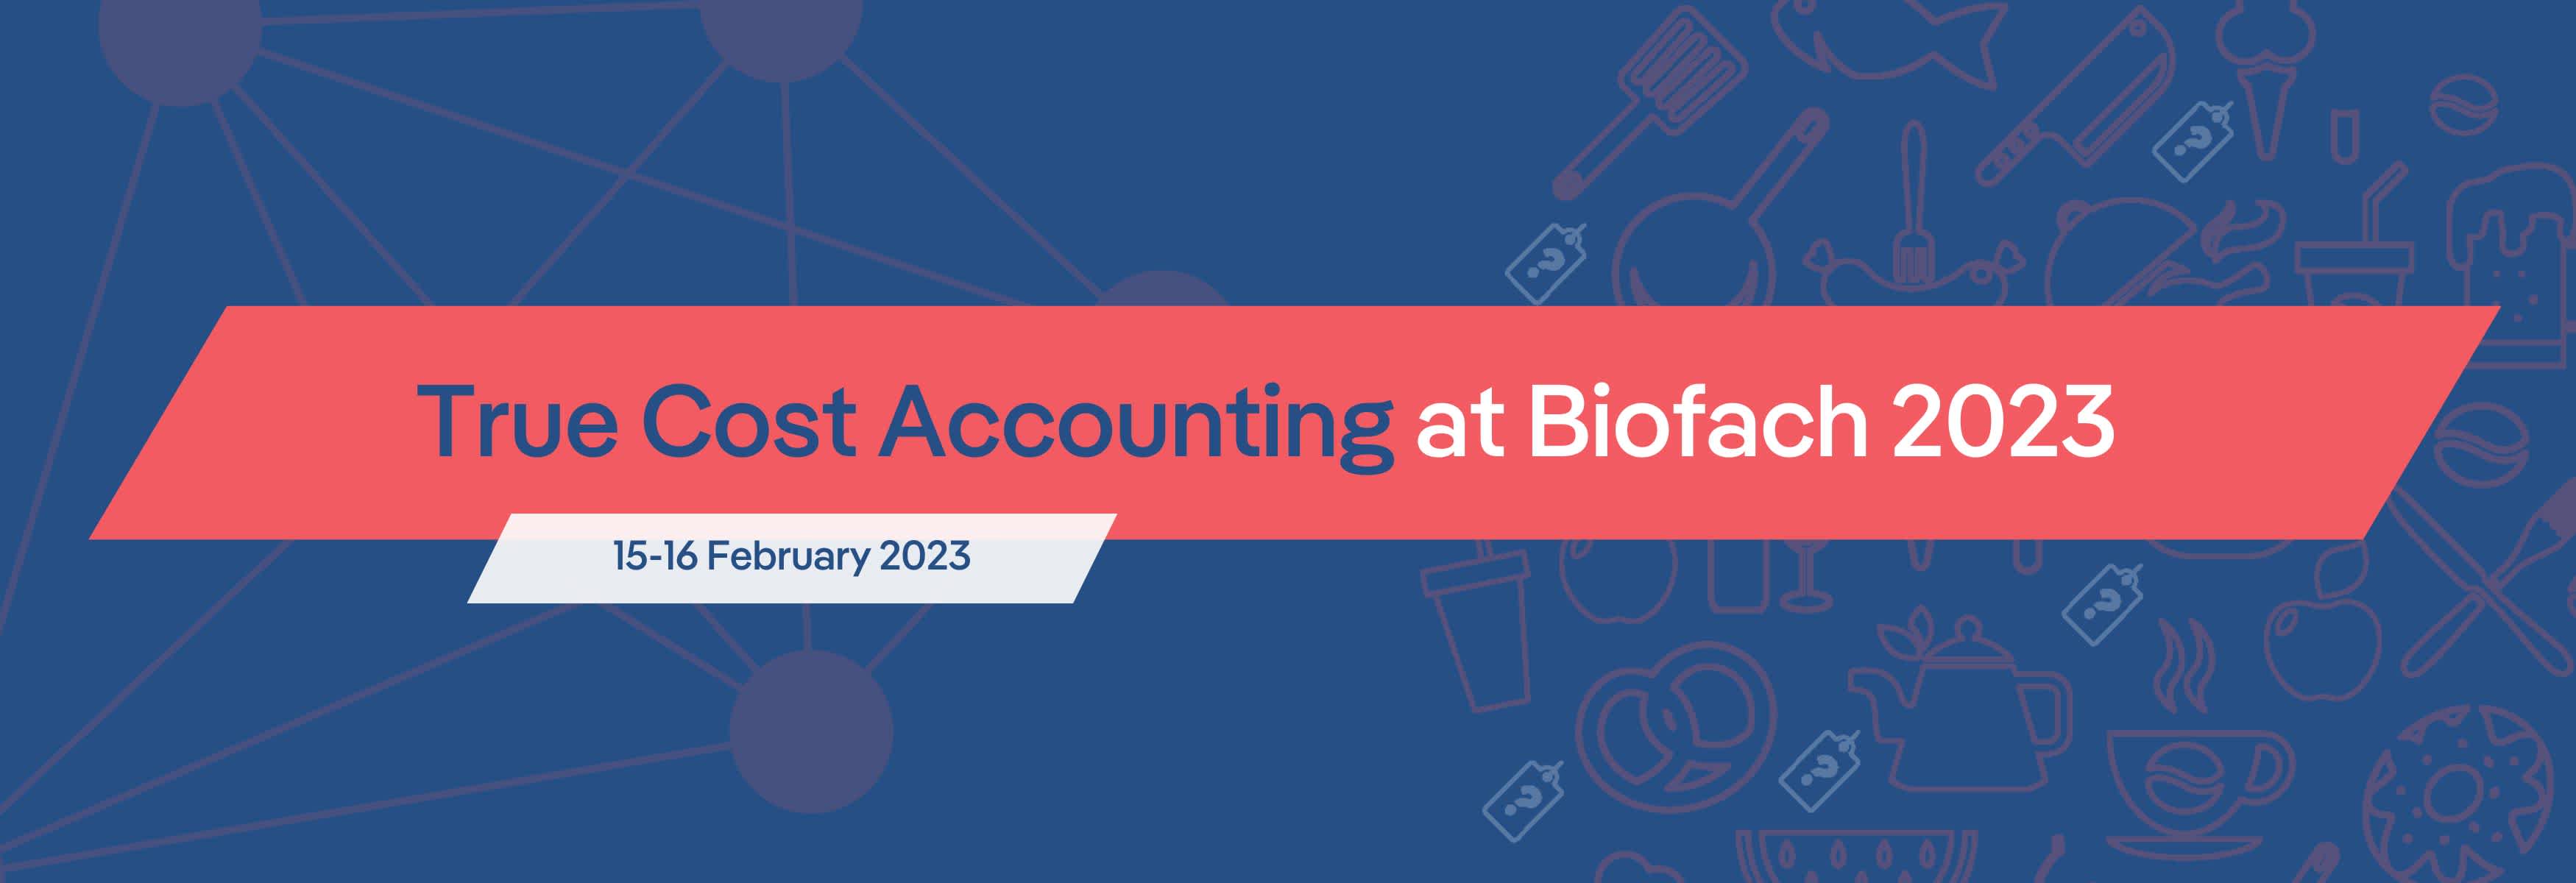 True Cost Accounting at BIOFACH 2023 